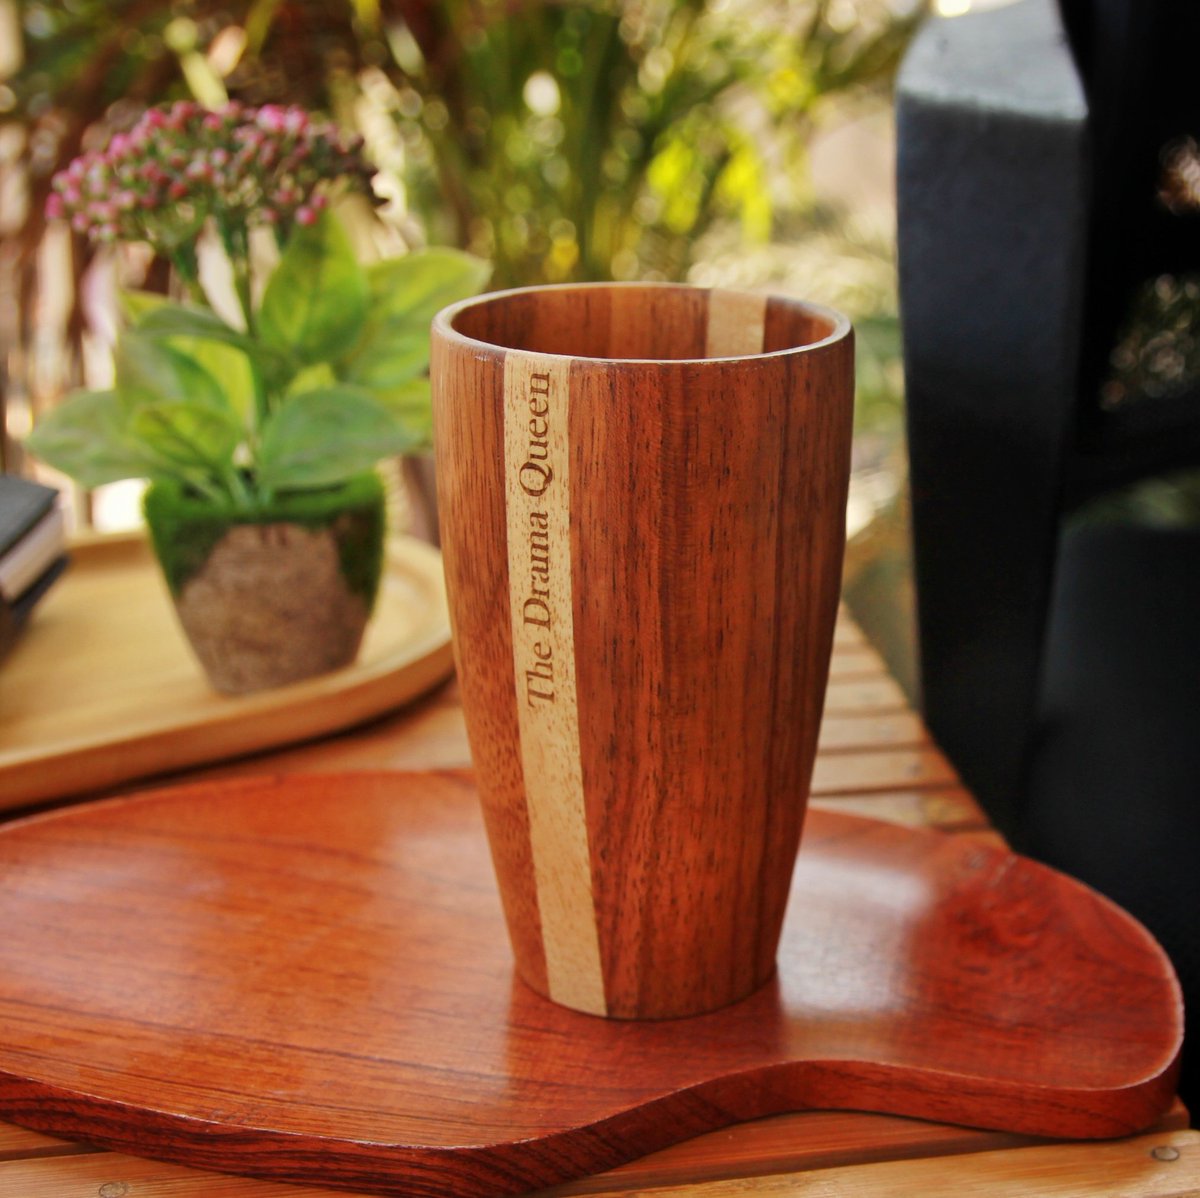 Sip and celebrate Valentine's Day with your partner enjoying your favourite drink in our wooden glassware that can be personalised with any text of your choice.
#woodgeek #woodgeekstore #tallglasses #highballglasses #valentinesday #giftforvalentine #romanticgifts